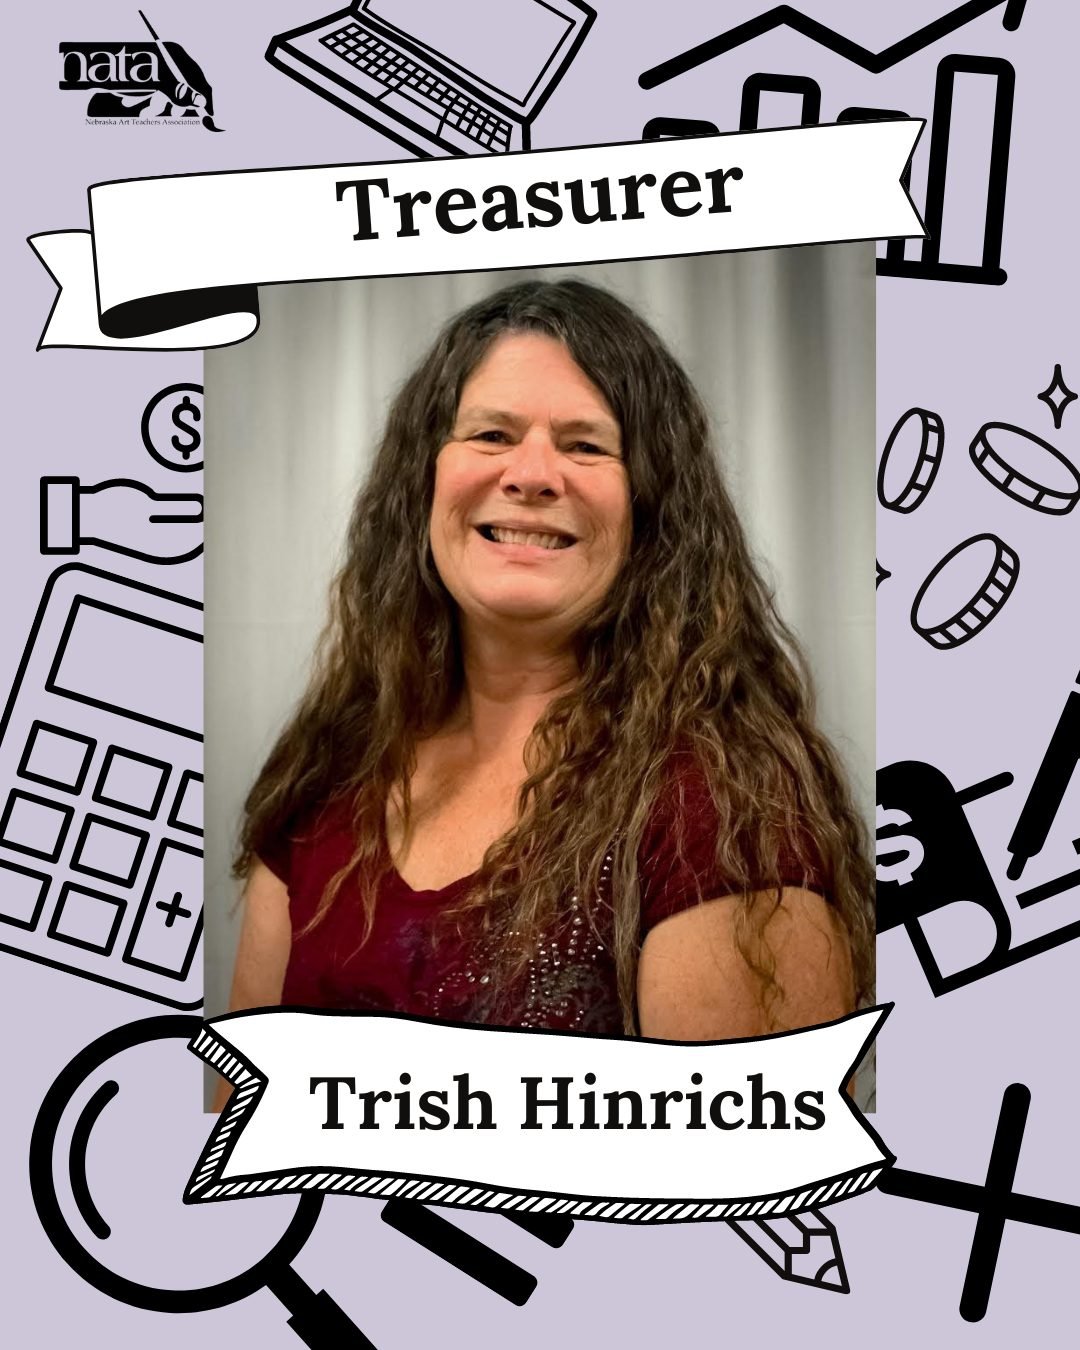 We are excited to be welcoming Trish Hinrichs as our treasurer, serving on the executive committee on our sitting board!

&ldquo;I have been a K-12 Art teacher for 20 years. I have been teaching at Silver Lake for 19 years. I teach many different med